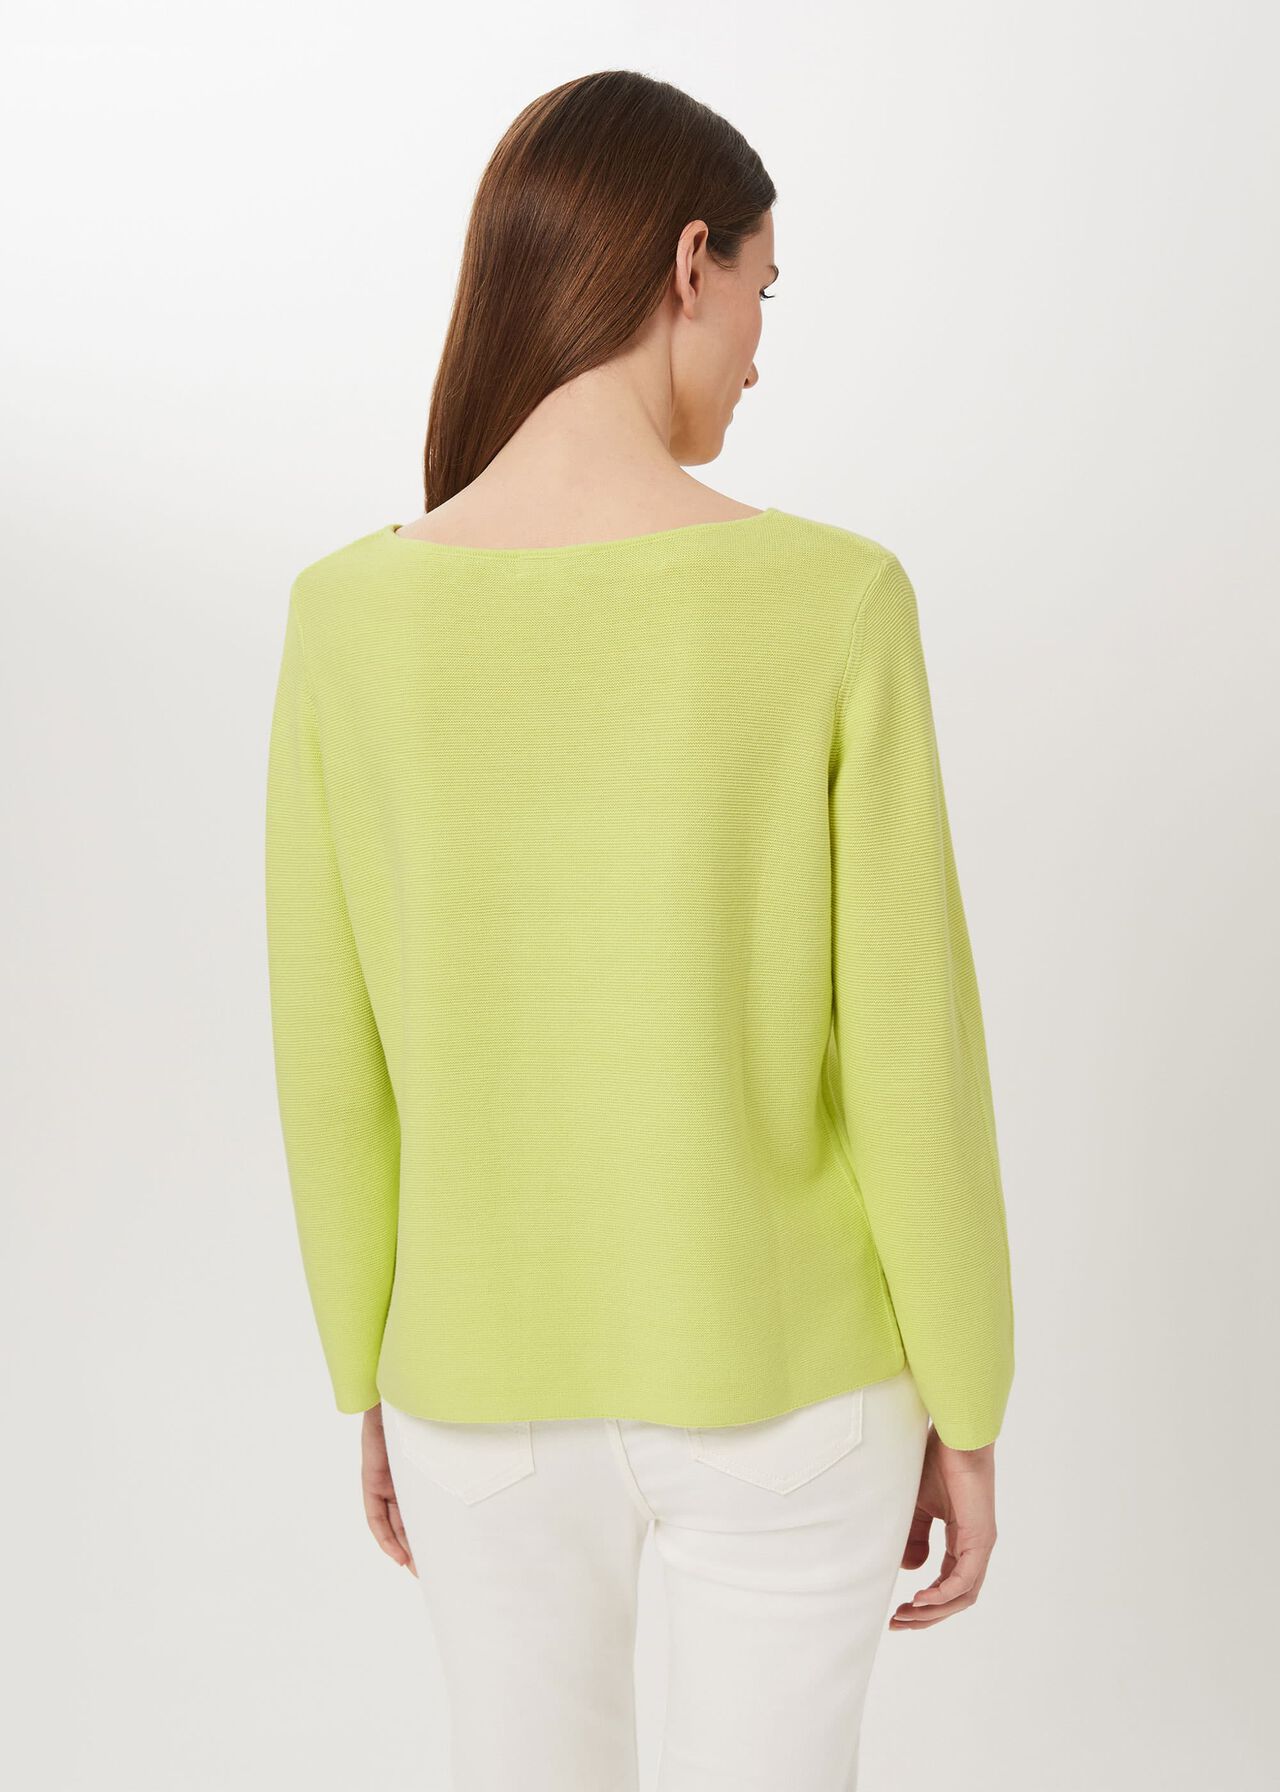 Beatrice Cotton Sweater, Lime Green, hi-res